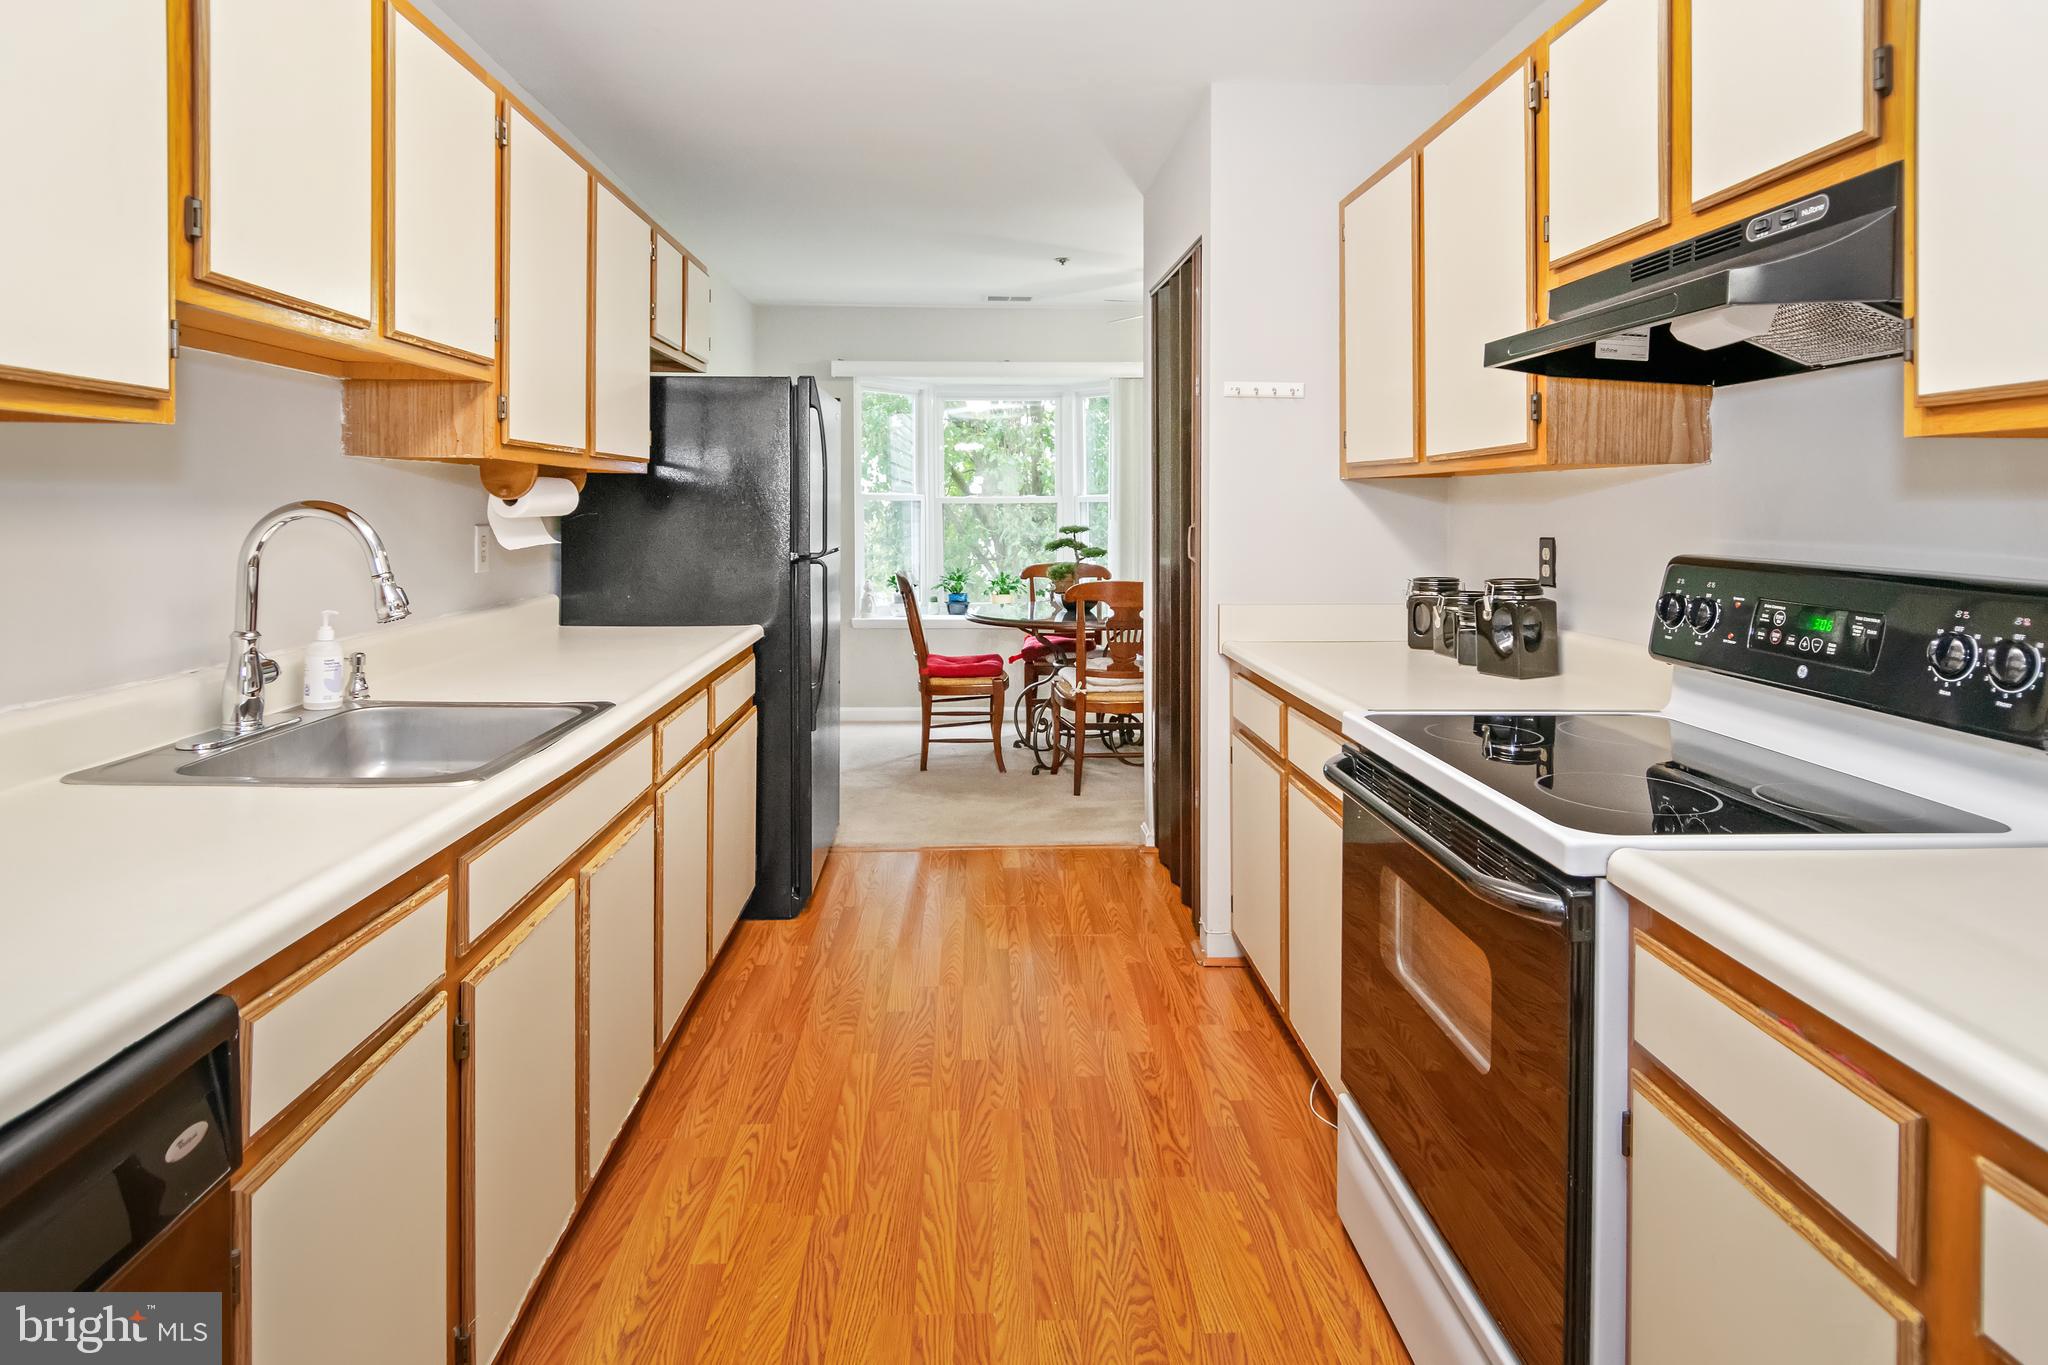 a kitchen with granite countertop a sink a counter top space and stainless steel appliances